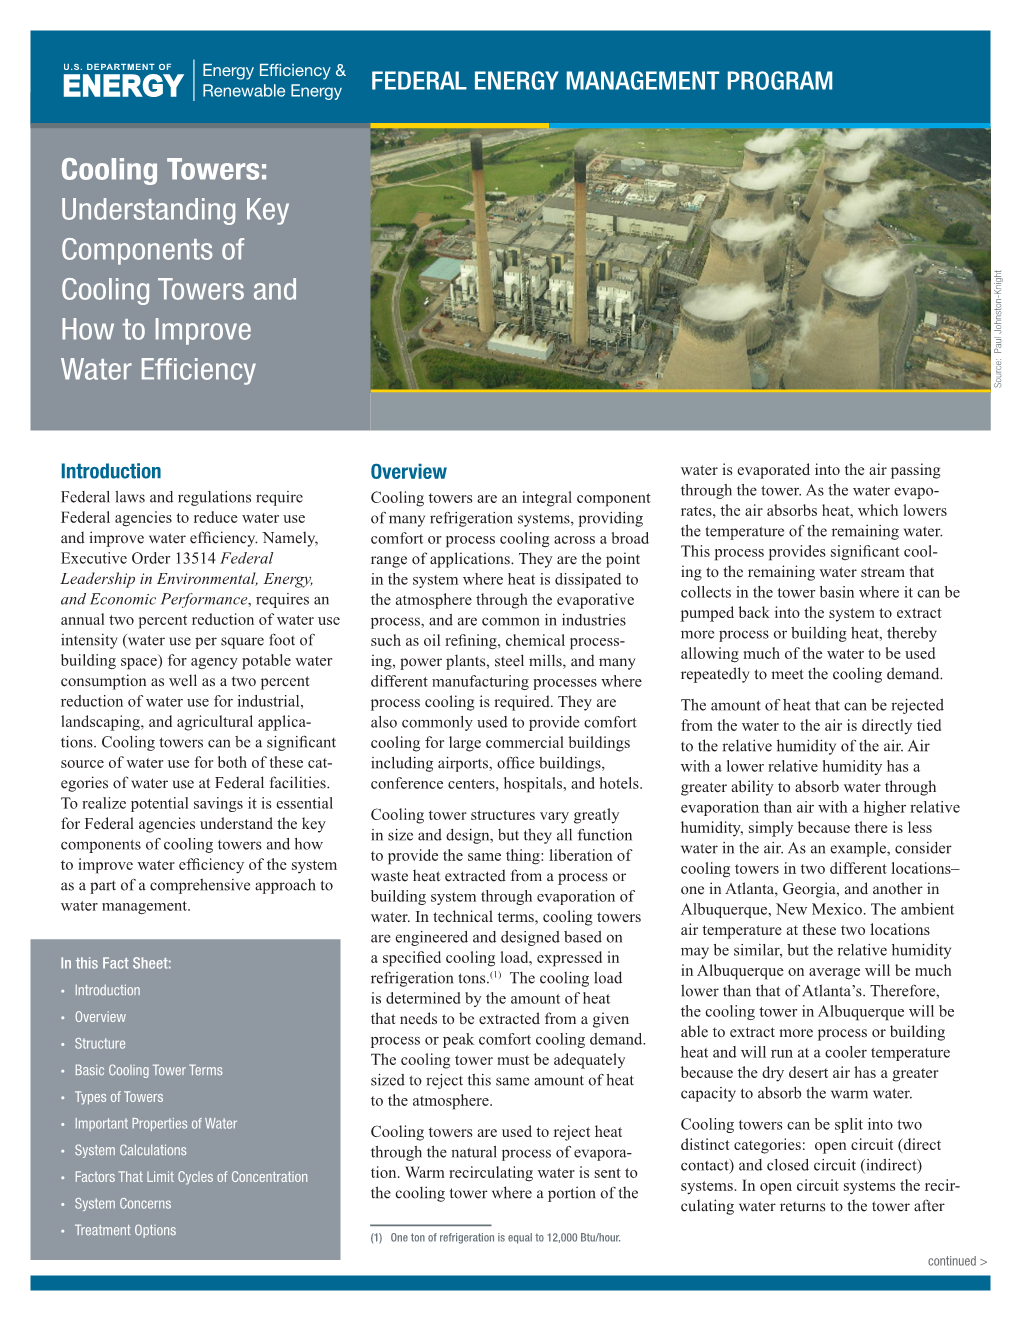 Cooling Towers: Understanding Key Components of Cooling Towers and How to Improve Water Efficiency Source: Paul Johnston-Knight Source